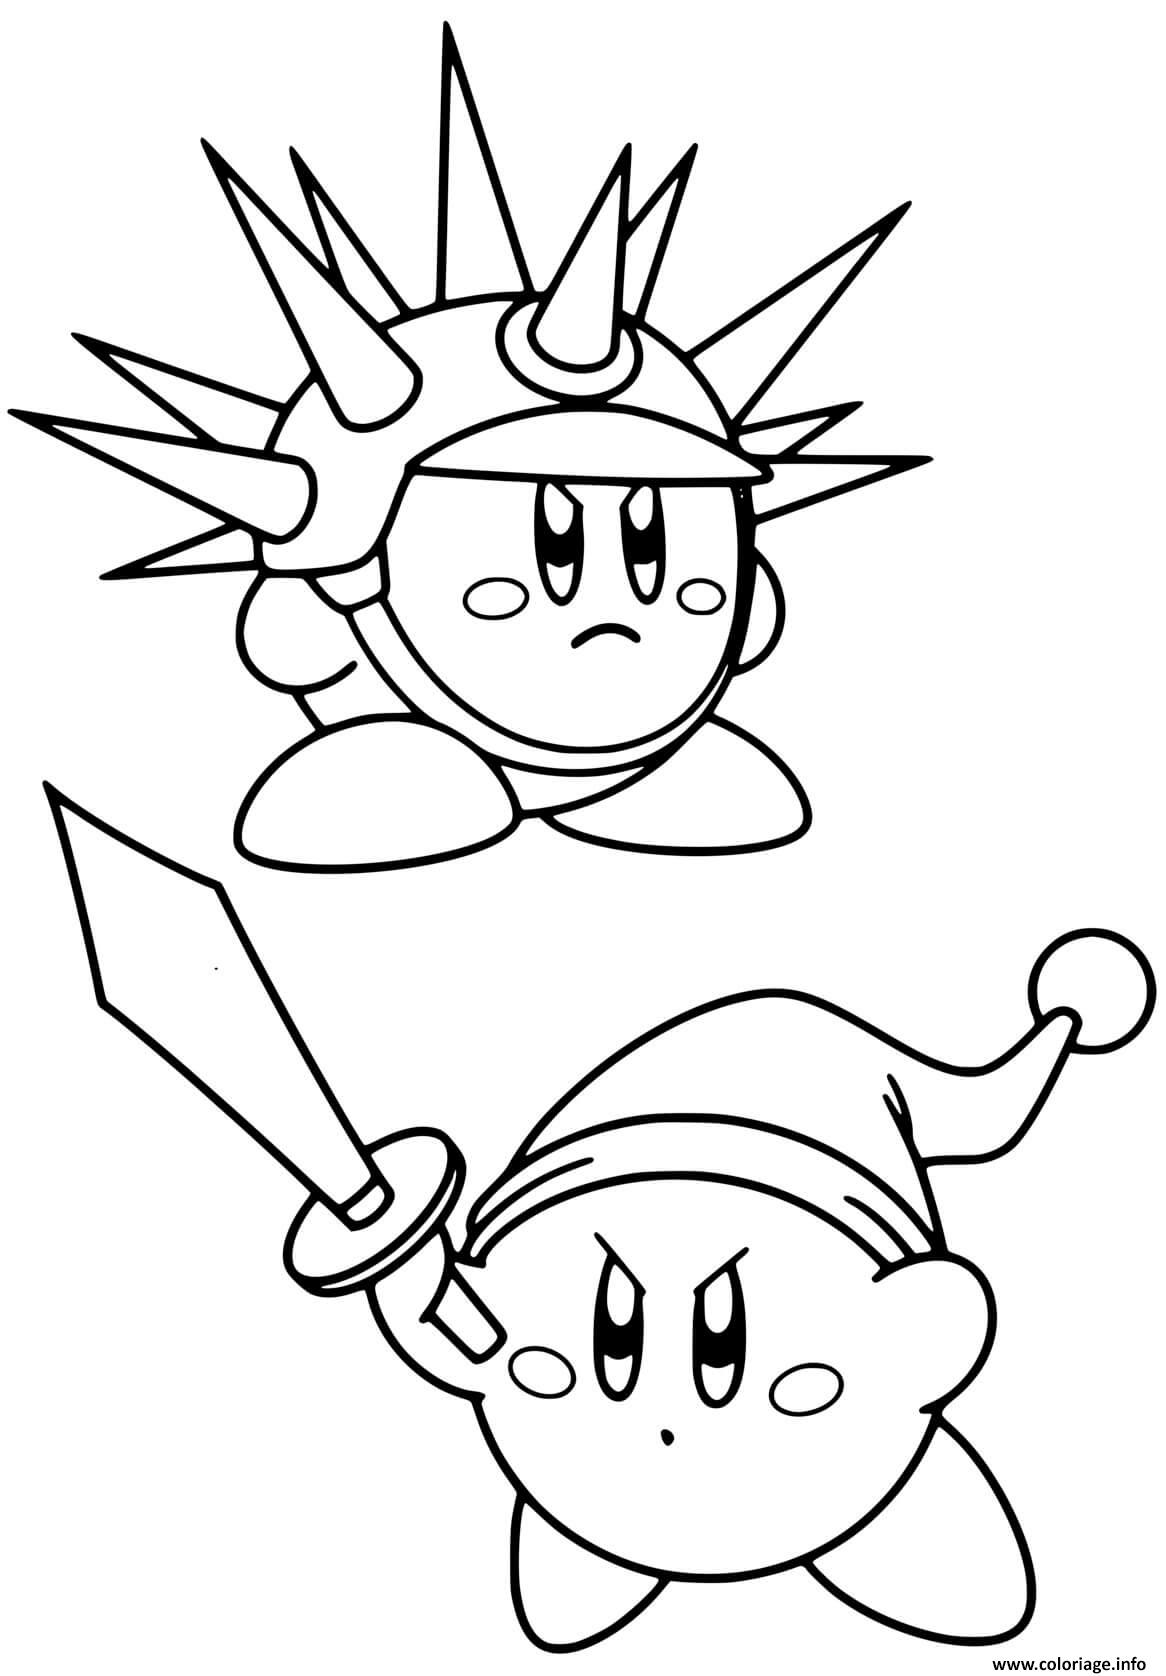 Coloriage Kirby Fighters 2 Dessin à Imprimer